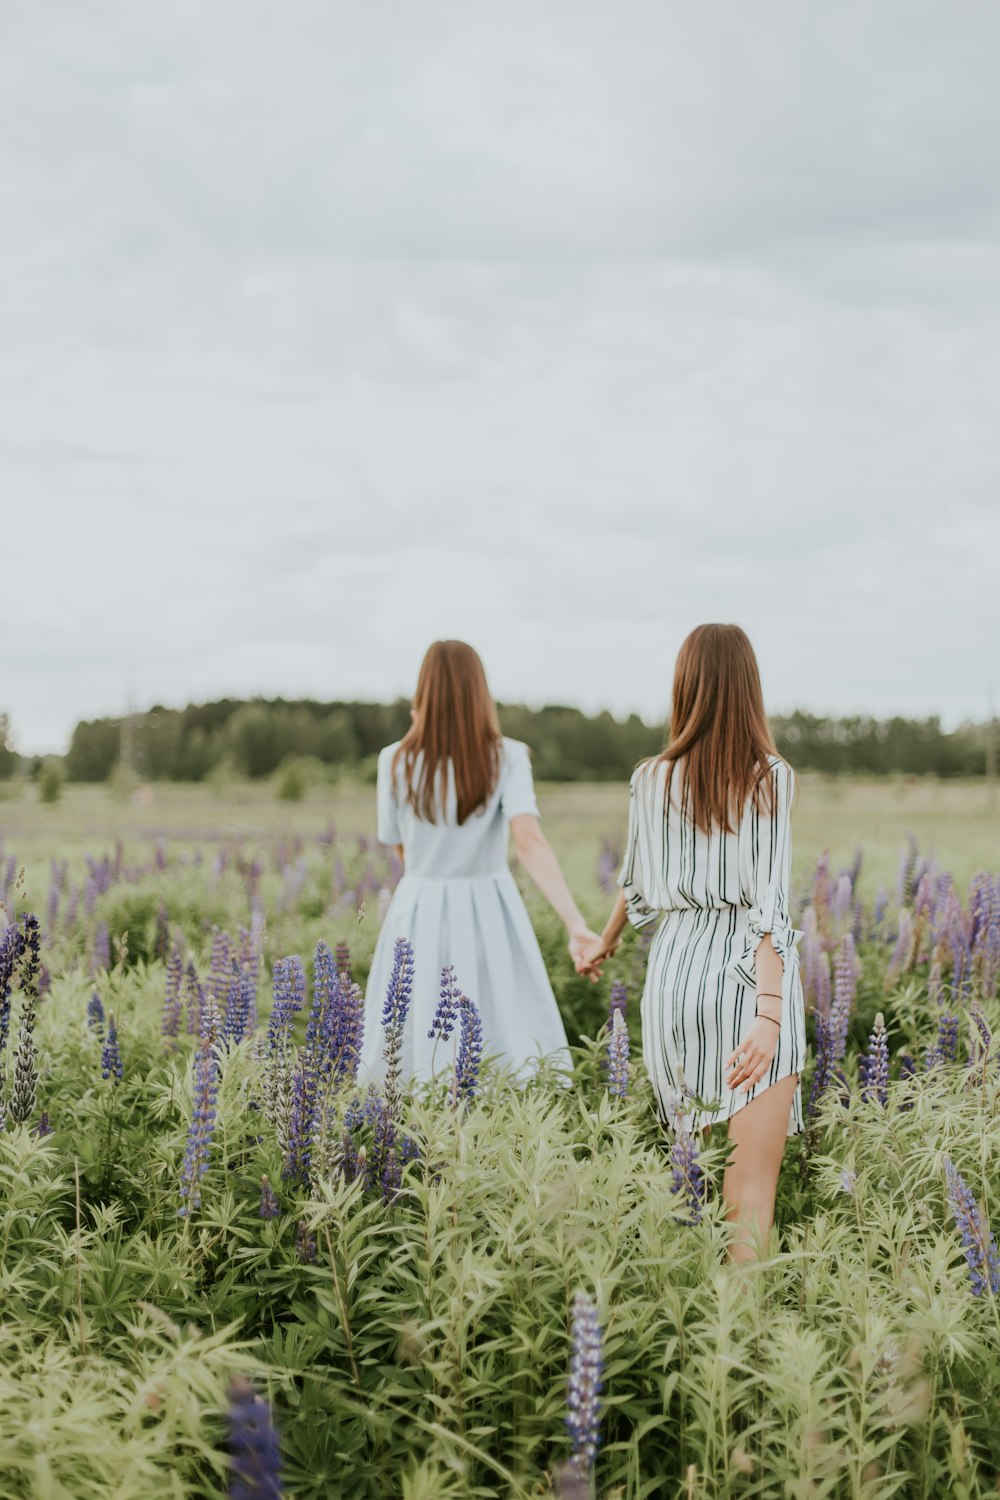 two women surrounded by lavender under nimbus clouds